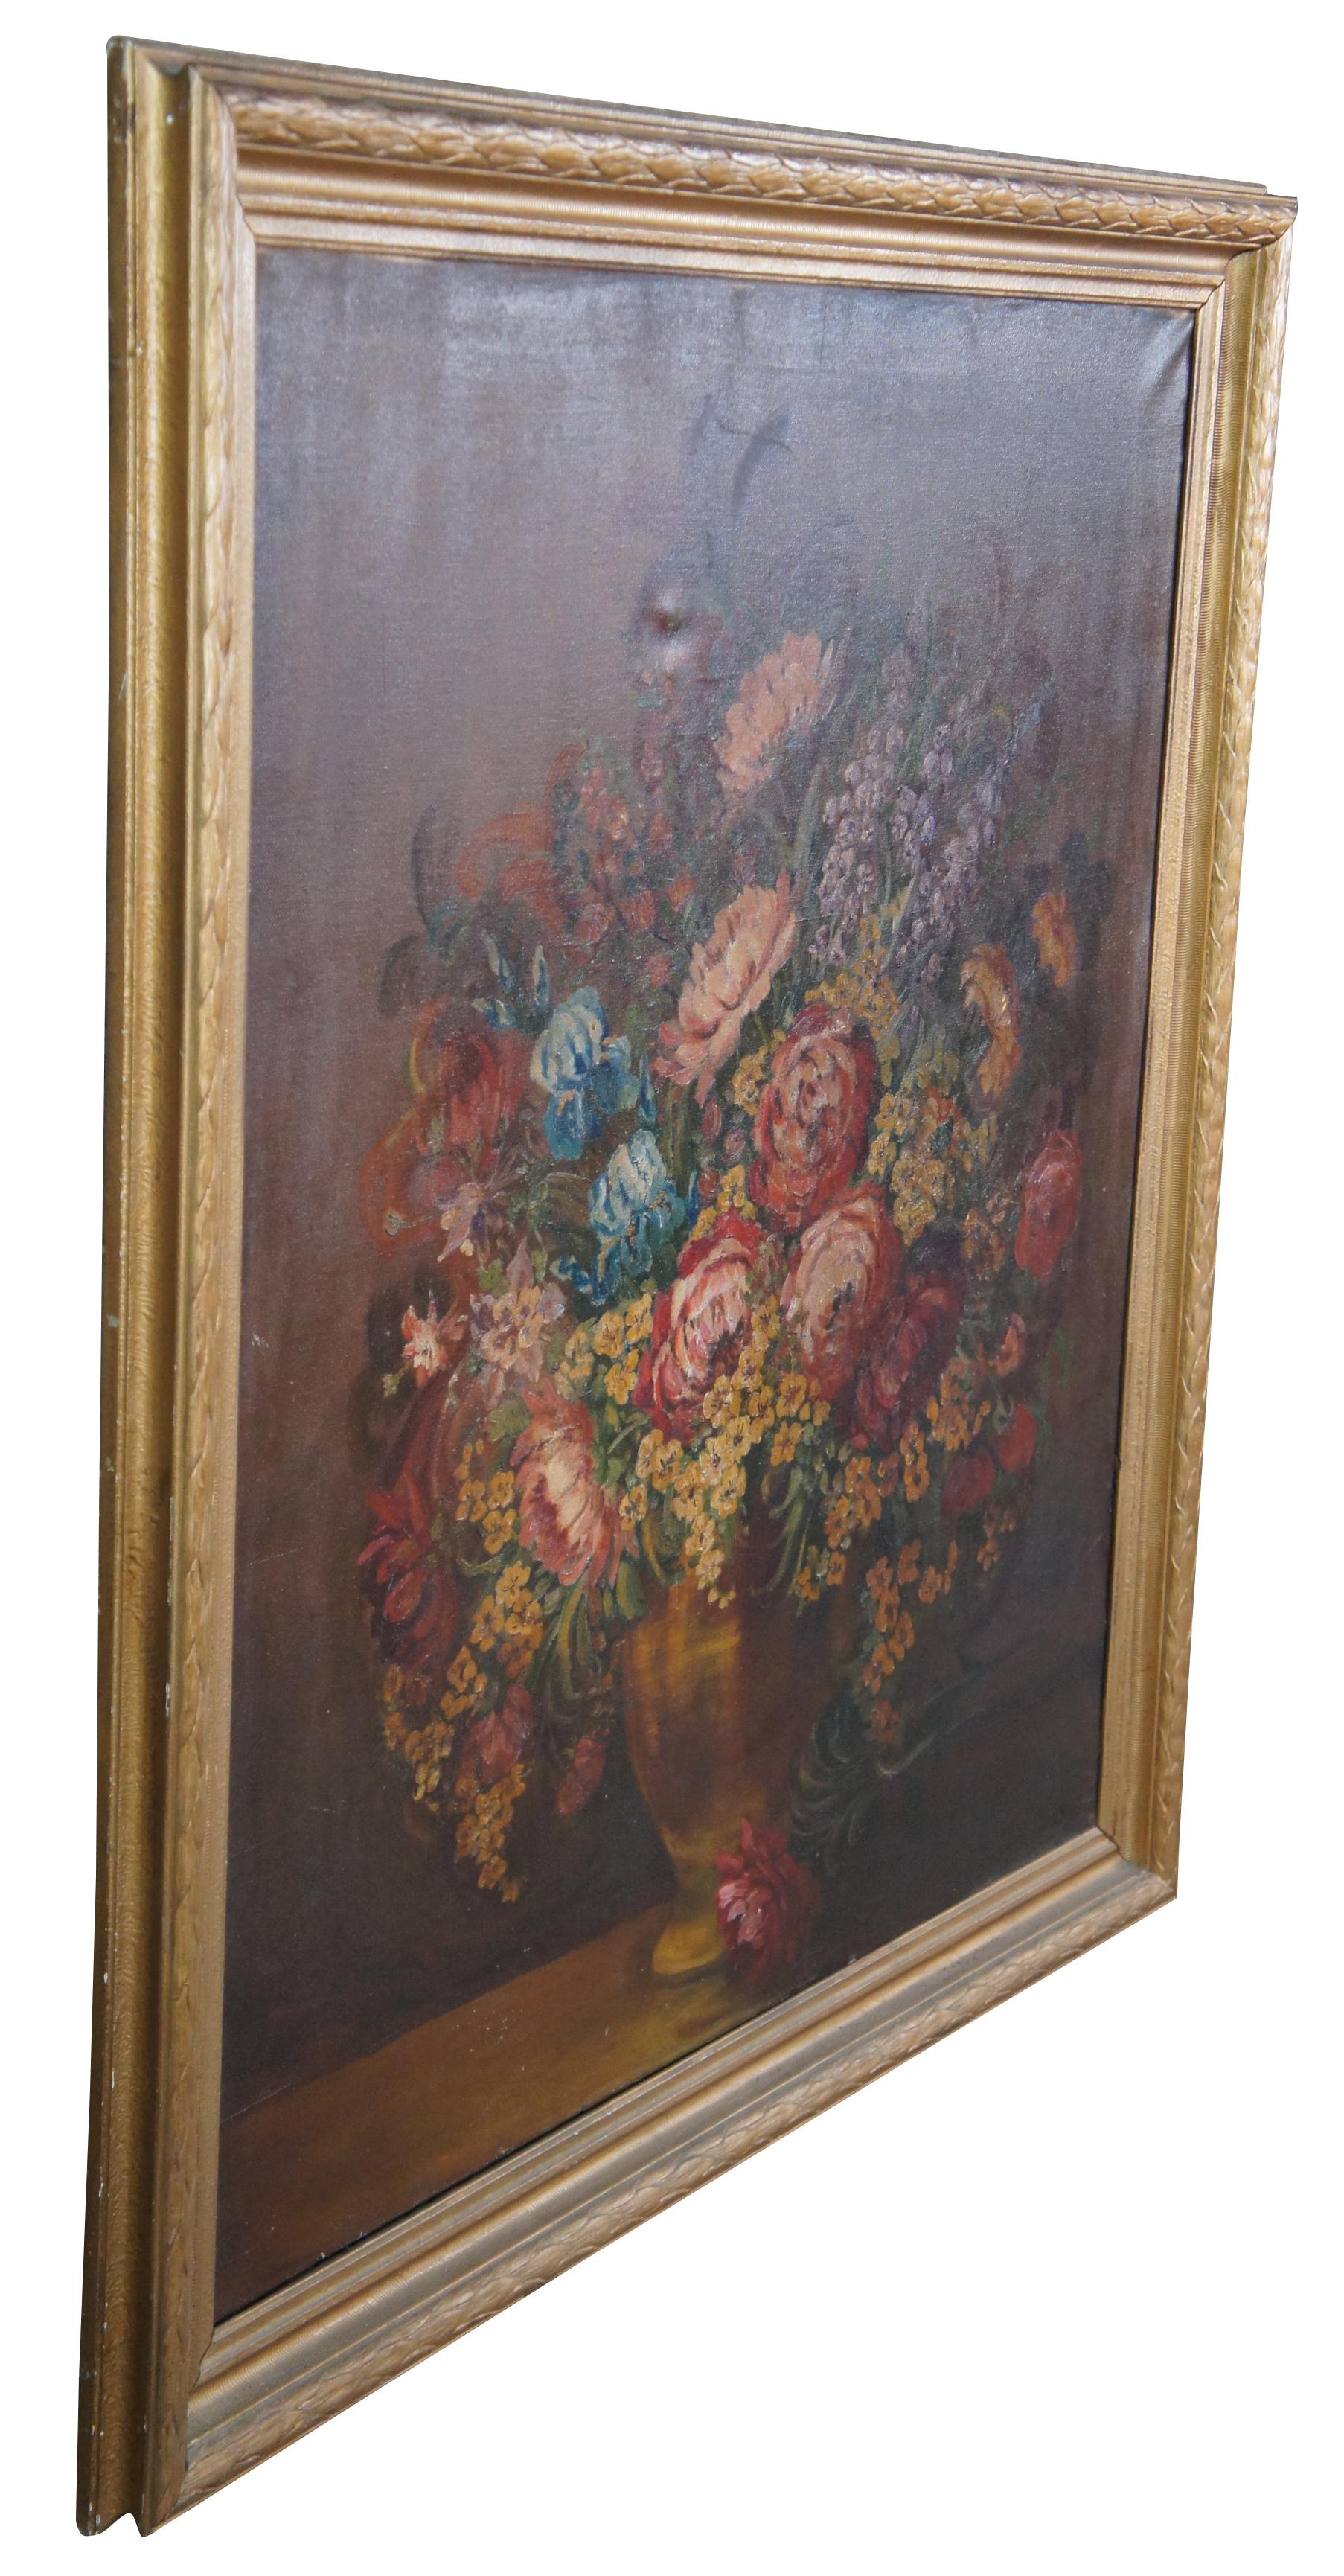 Edwardian Antique Early 20th Century Floral Bouquet of Flowers Still Life Oil Painting